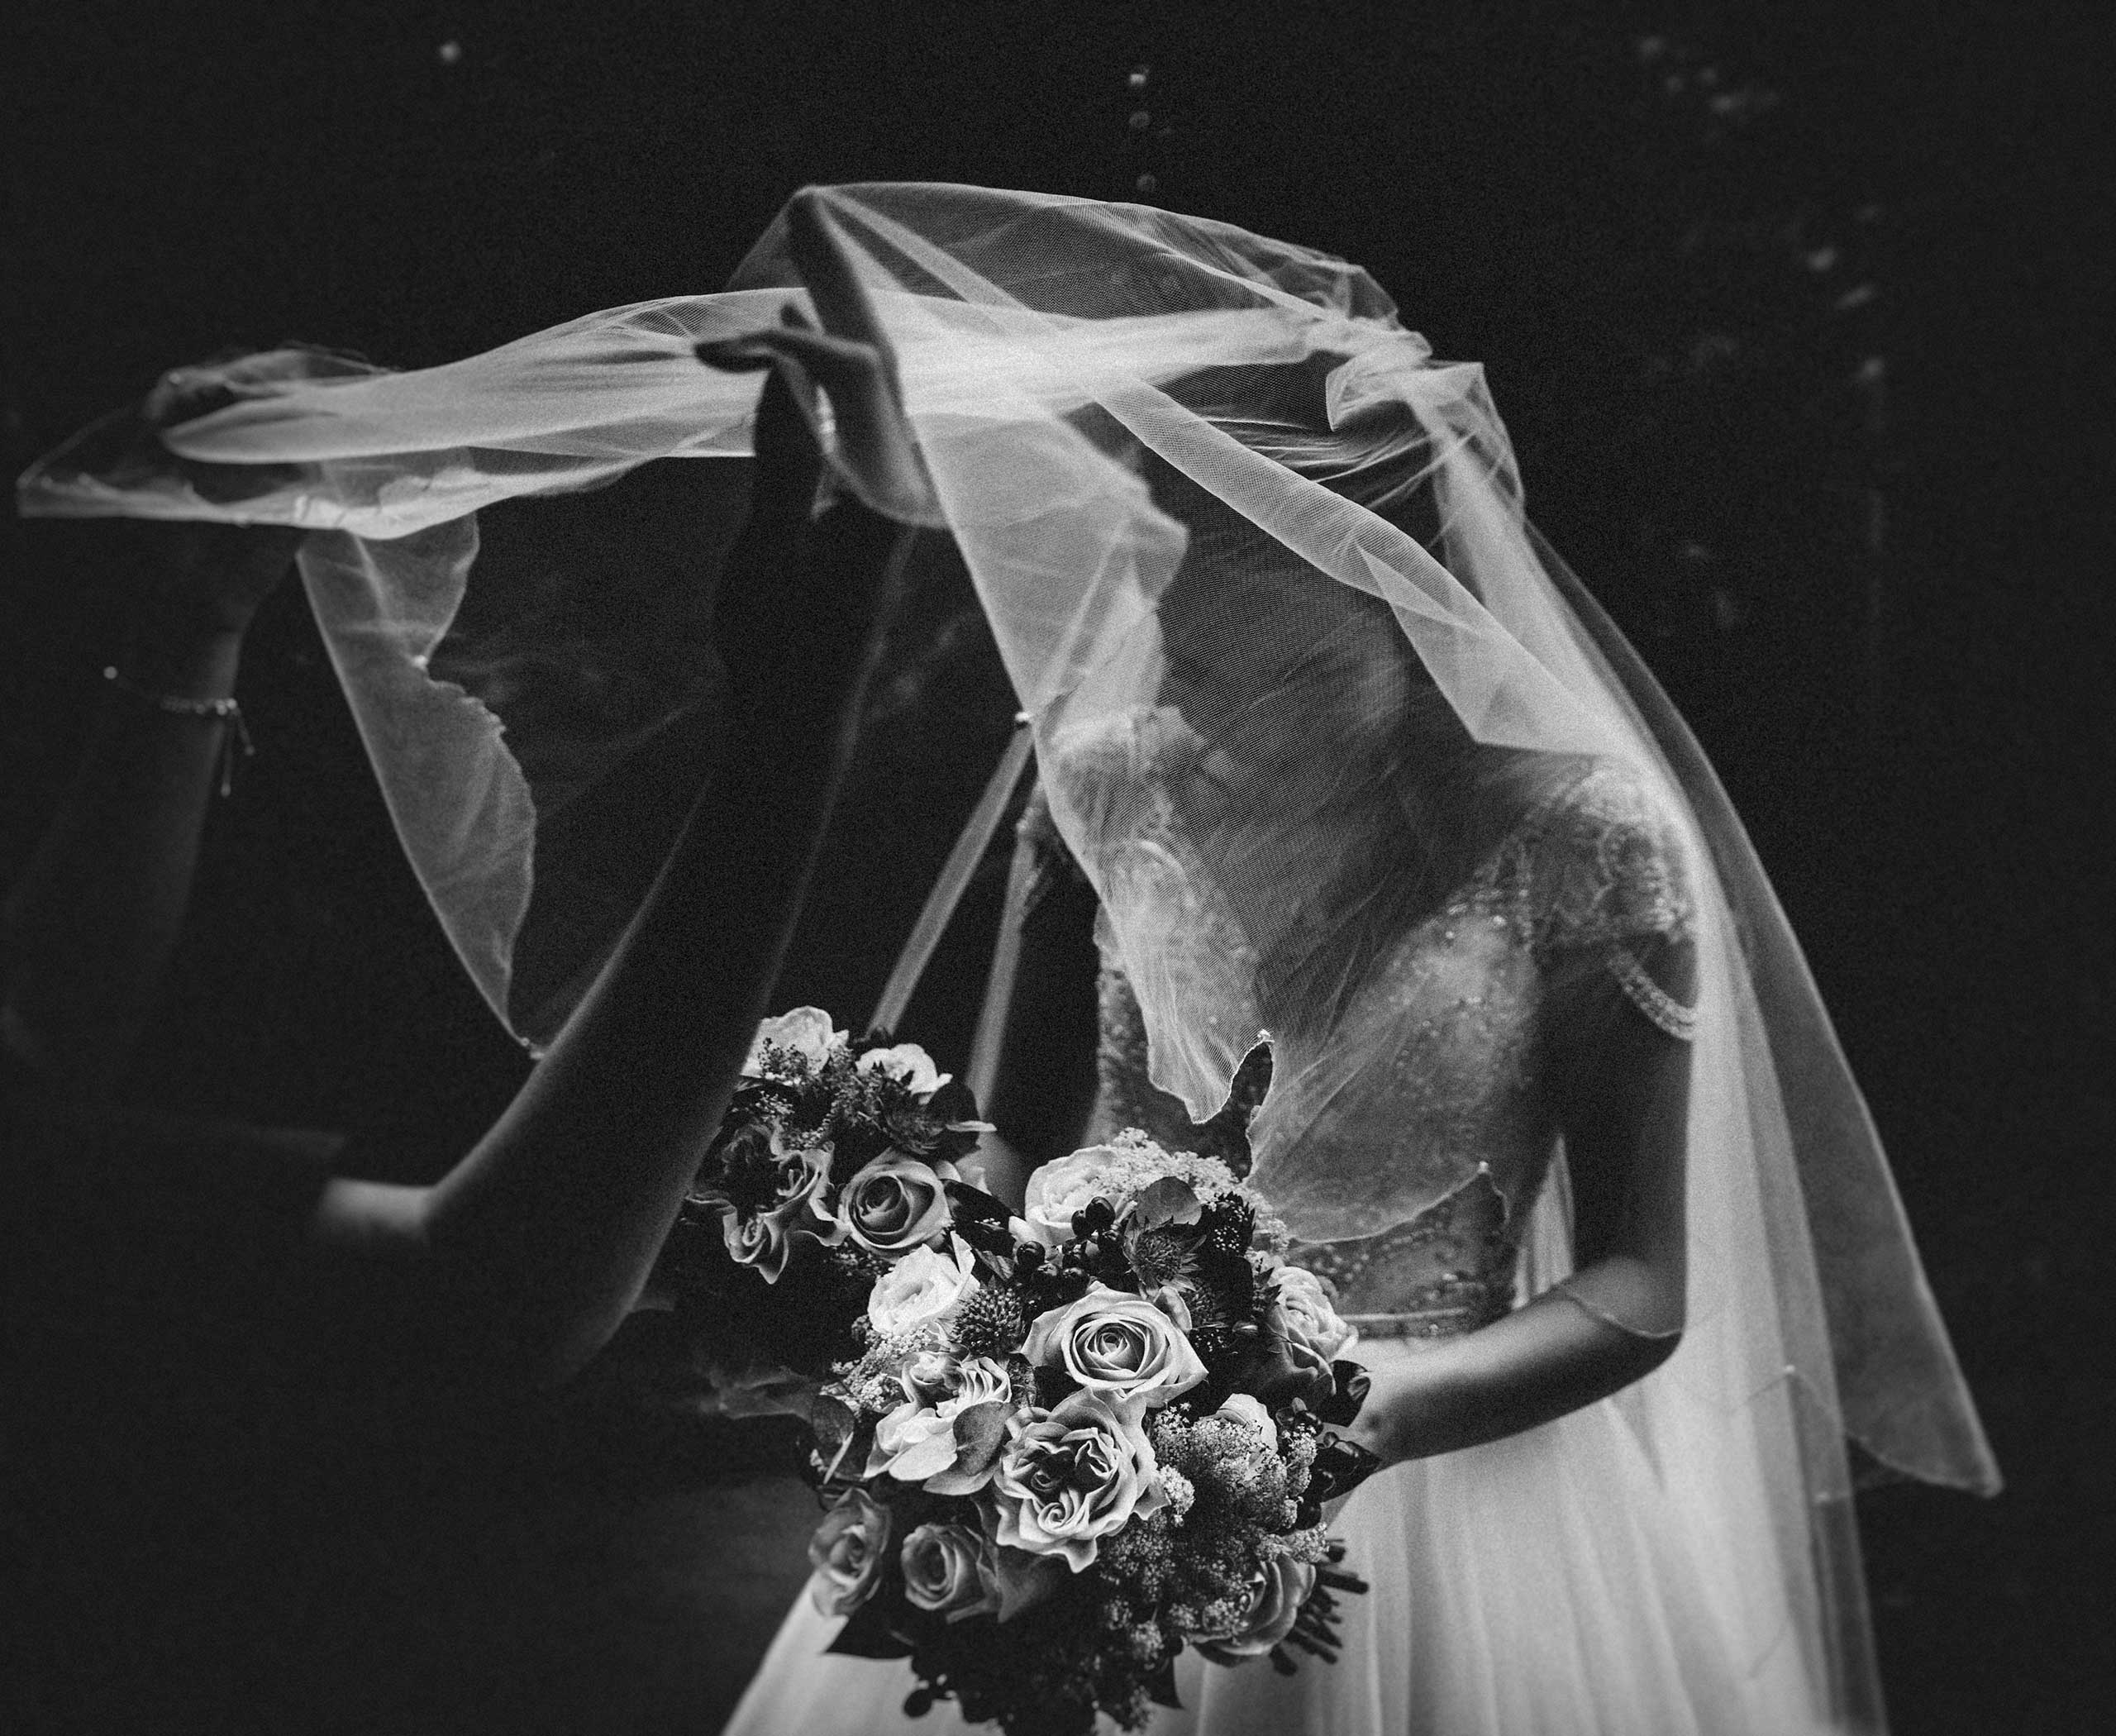 The beautiful bride has her veil placed over her by a bridesmaid.